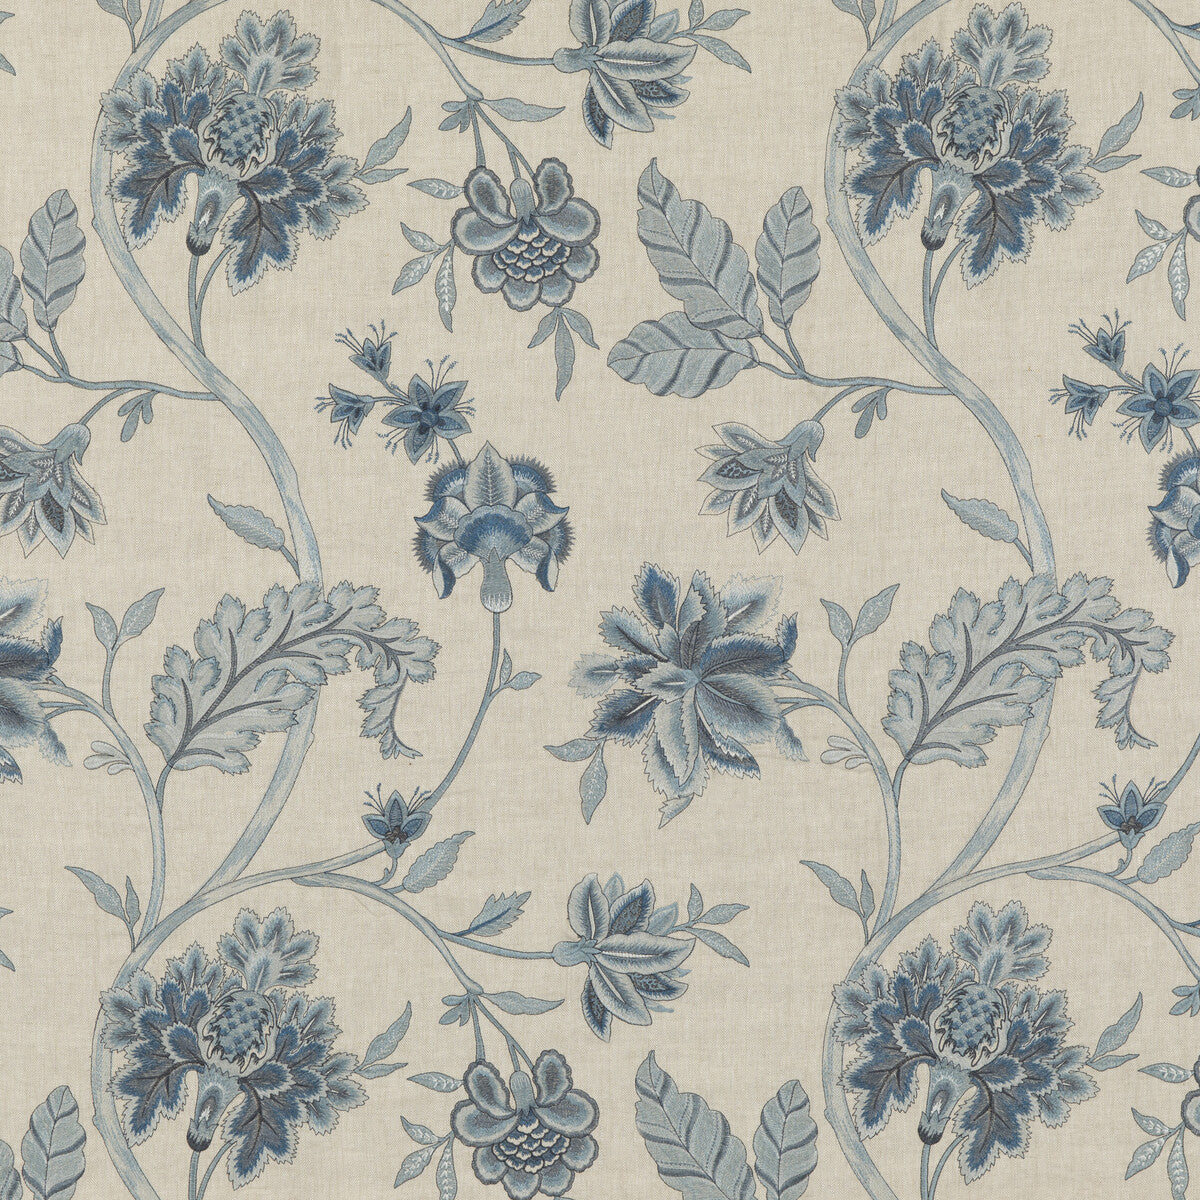 Arundel fabric in blue color - pattern BF10904.1.0 - by G P &amp; J Baker in the Portobello collection